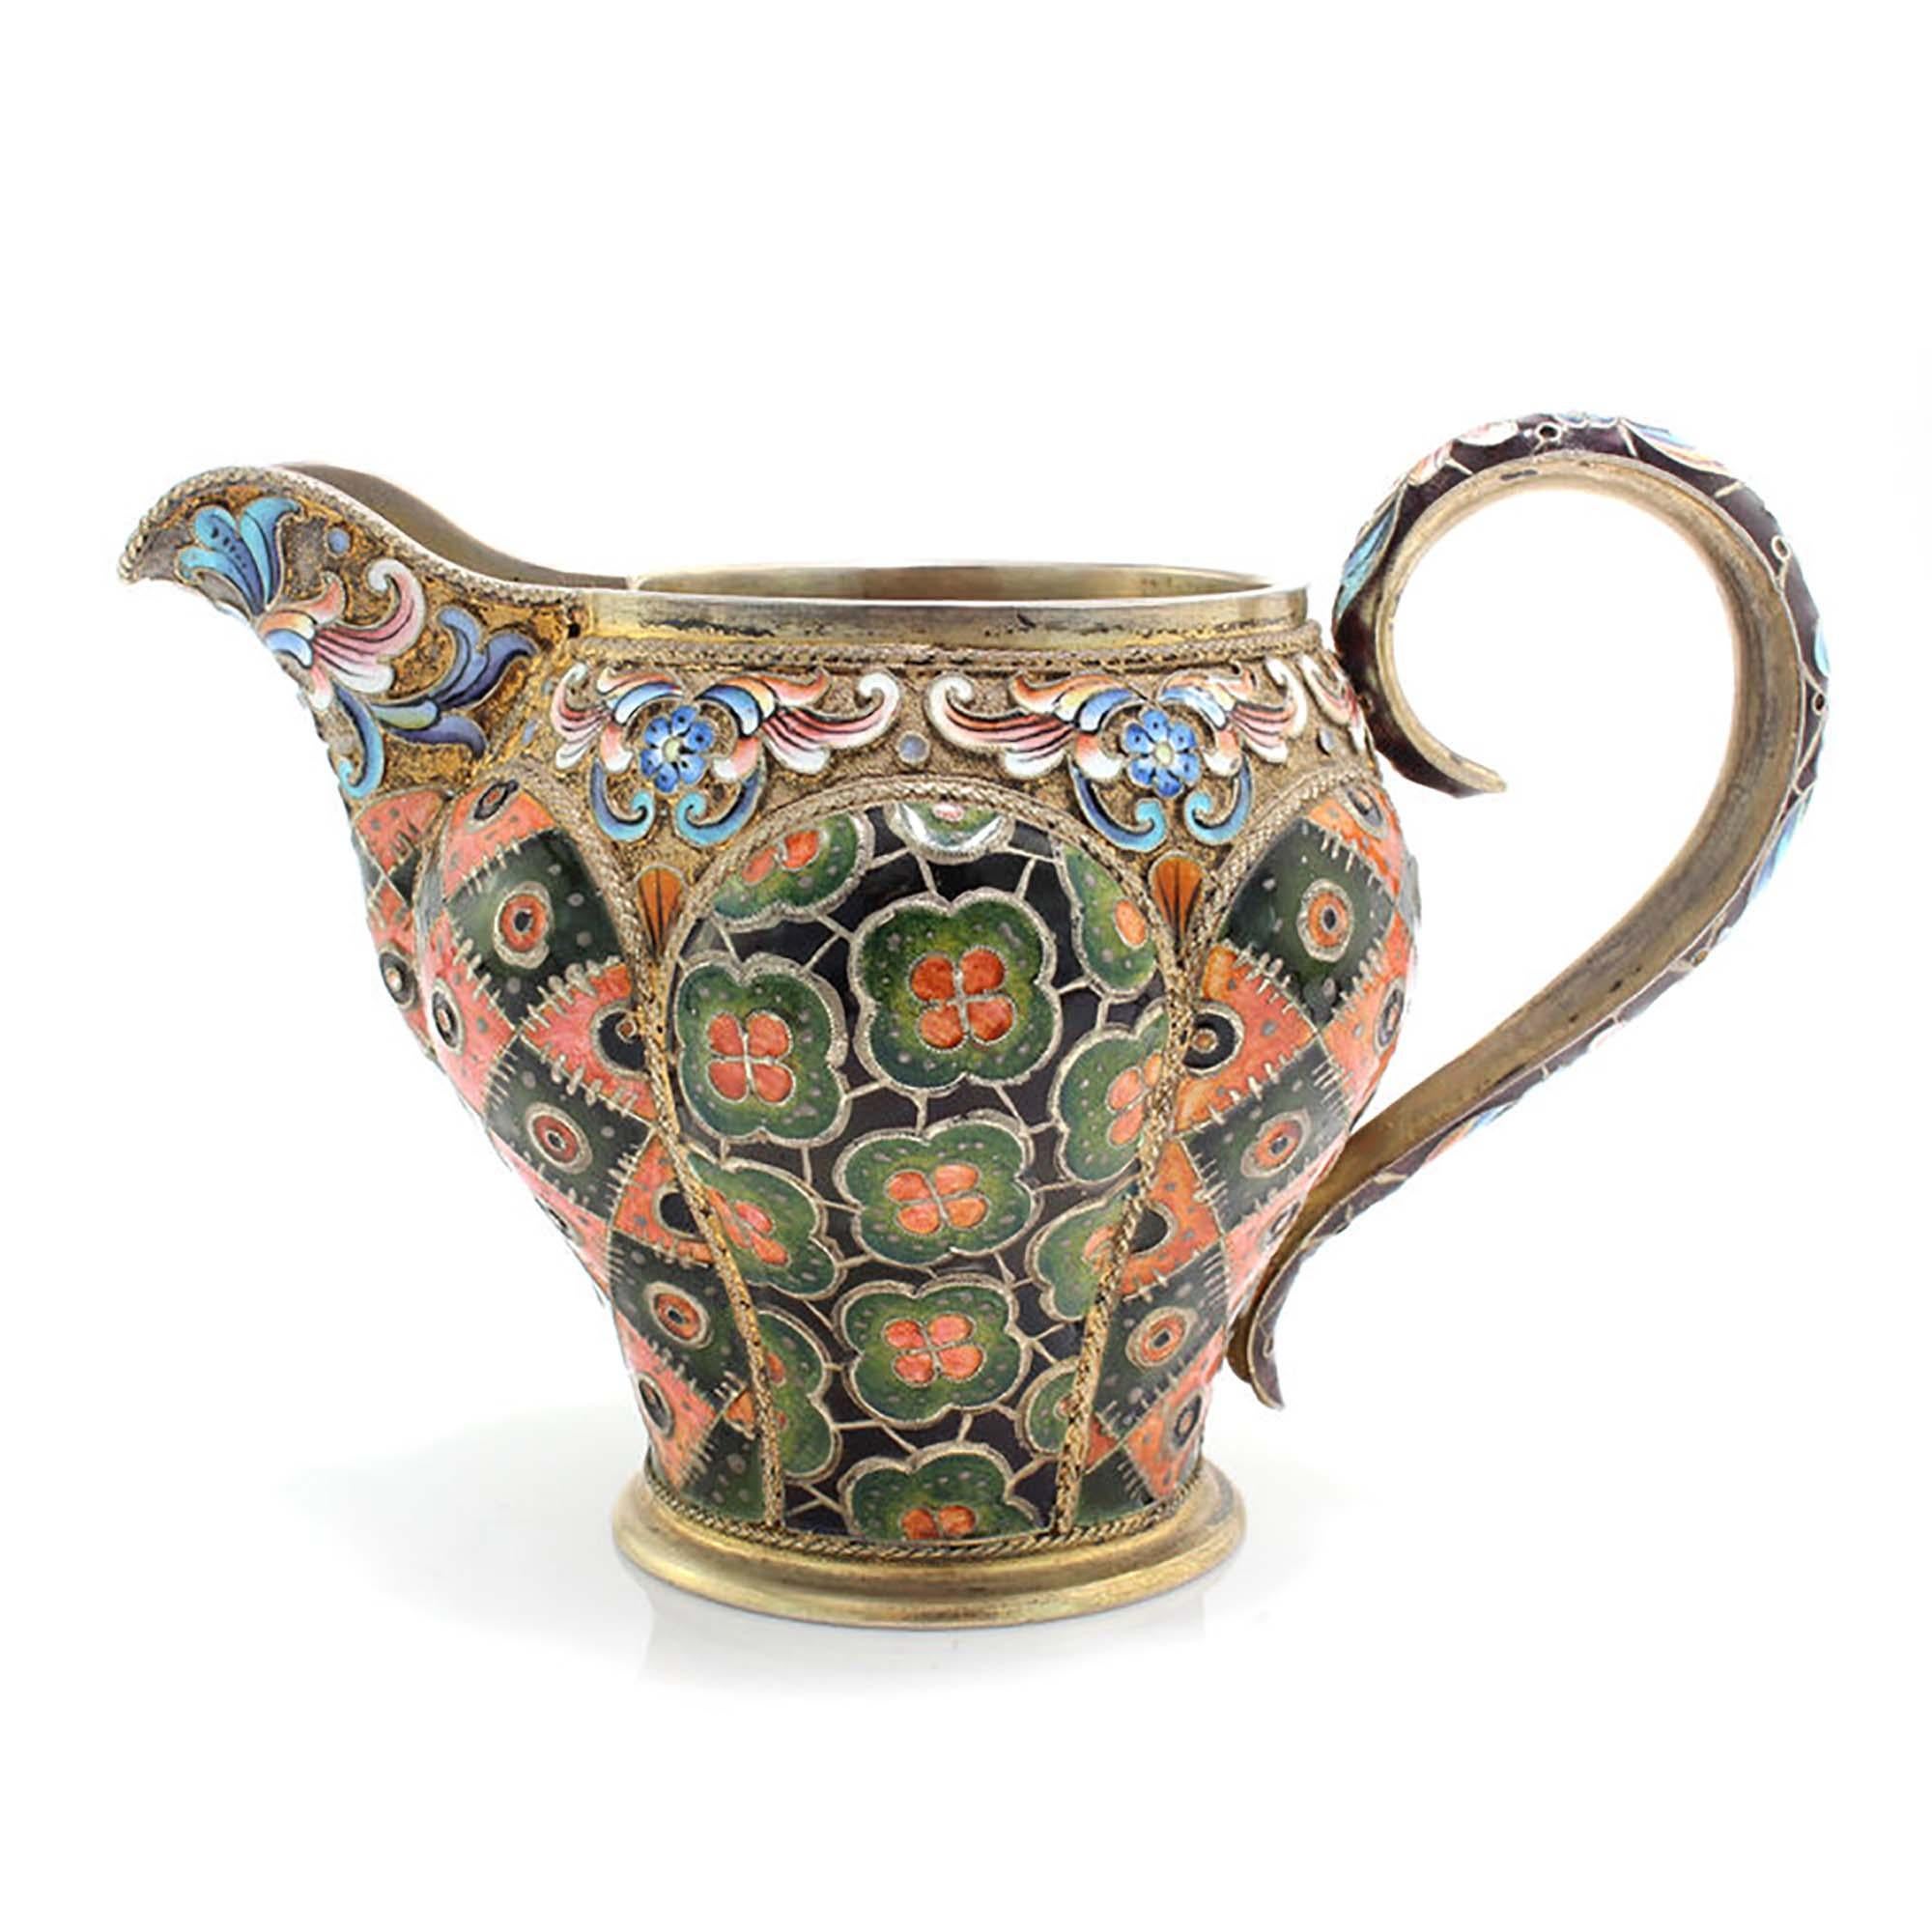 Russia silver-gilt and cloisonné enamel sugar bowl and creamer, 6th Artel, Moscow, 1908-1917.

Silver-gilt with beautiful enamel workmanship, they're just the perfect pairing for tea with friends or tea alone. They can also bee used as coffee